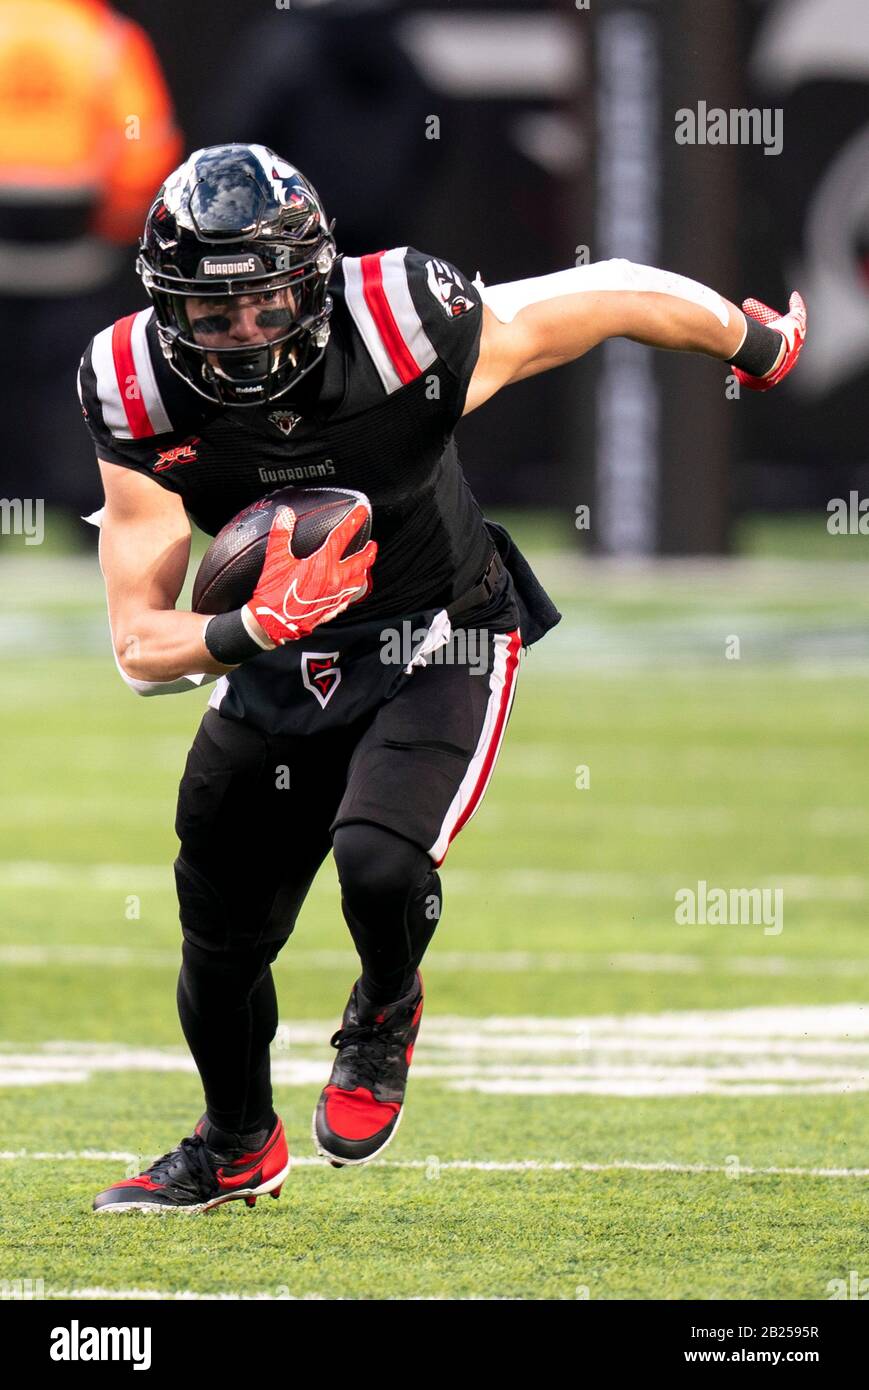 East Rutherford, New Jersey, USA. 29th Feb, 2020. New York Guardians wide  receiver Colby Pearson (3) in action during the XFL game against the Los  Angeles Wildcats at MetLife Stadium in East